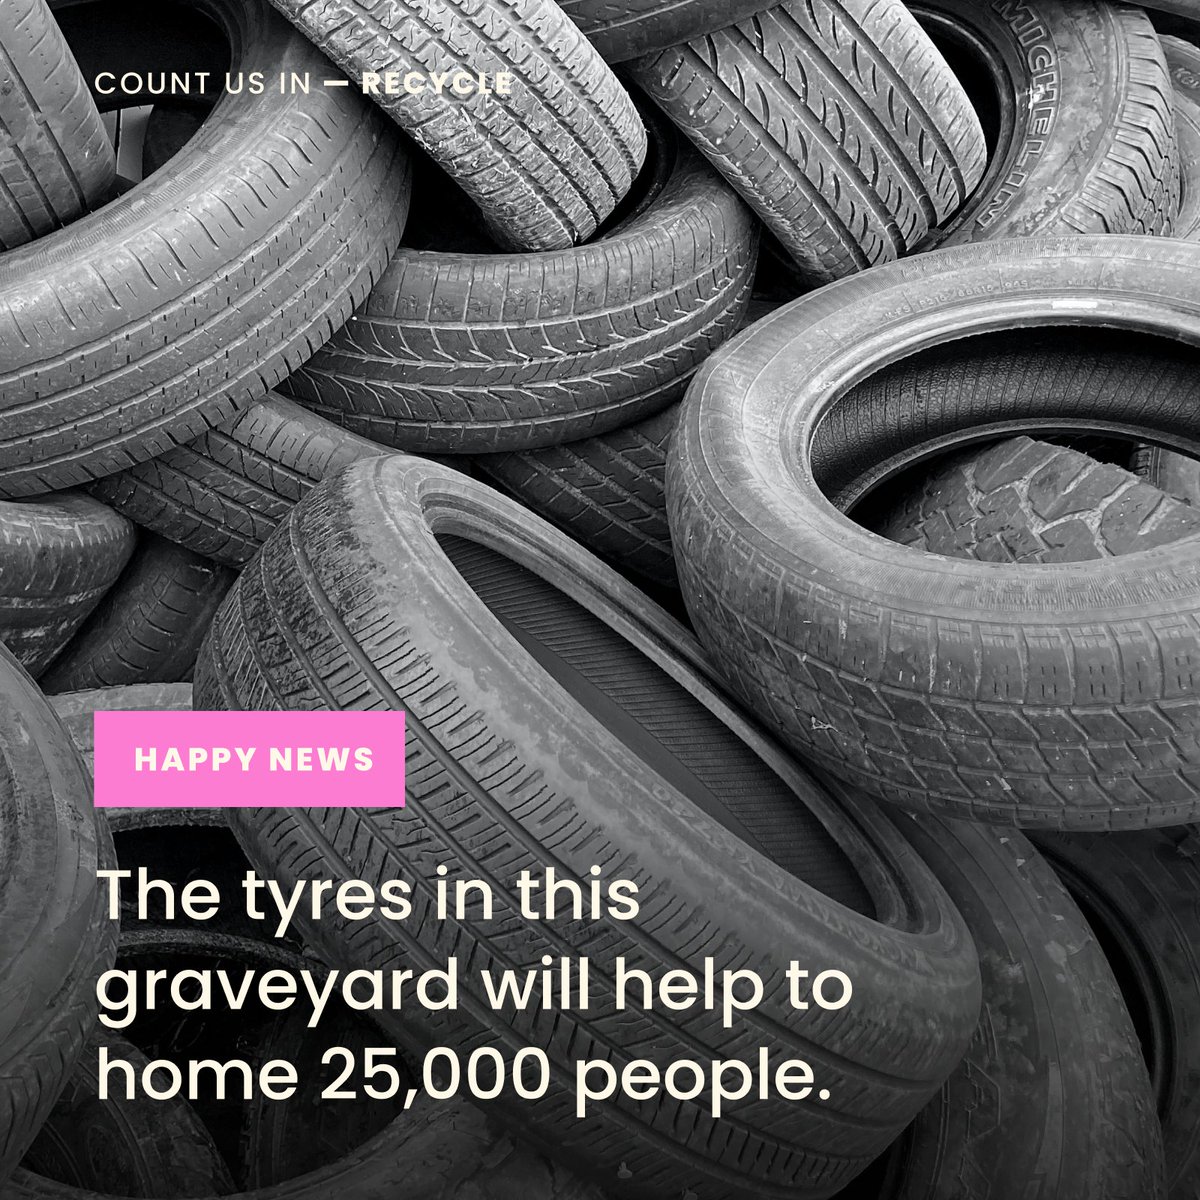 🛞 Did you know Kuwait has a graveyard with 42M tyres? ♻️ They're reborn as rubber tiles, reducing waste and offering eco-friendly flooring! Would you walk on tyres for the environment? Let us know! #sustainability #rubbertyres #reuseandrecycle